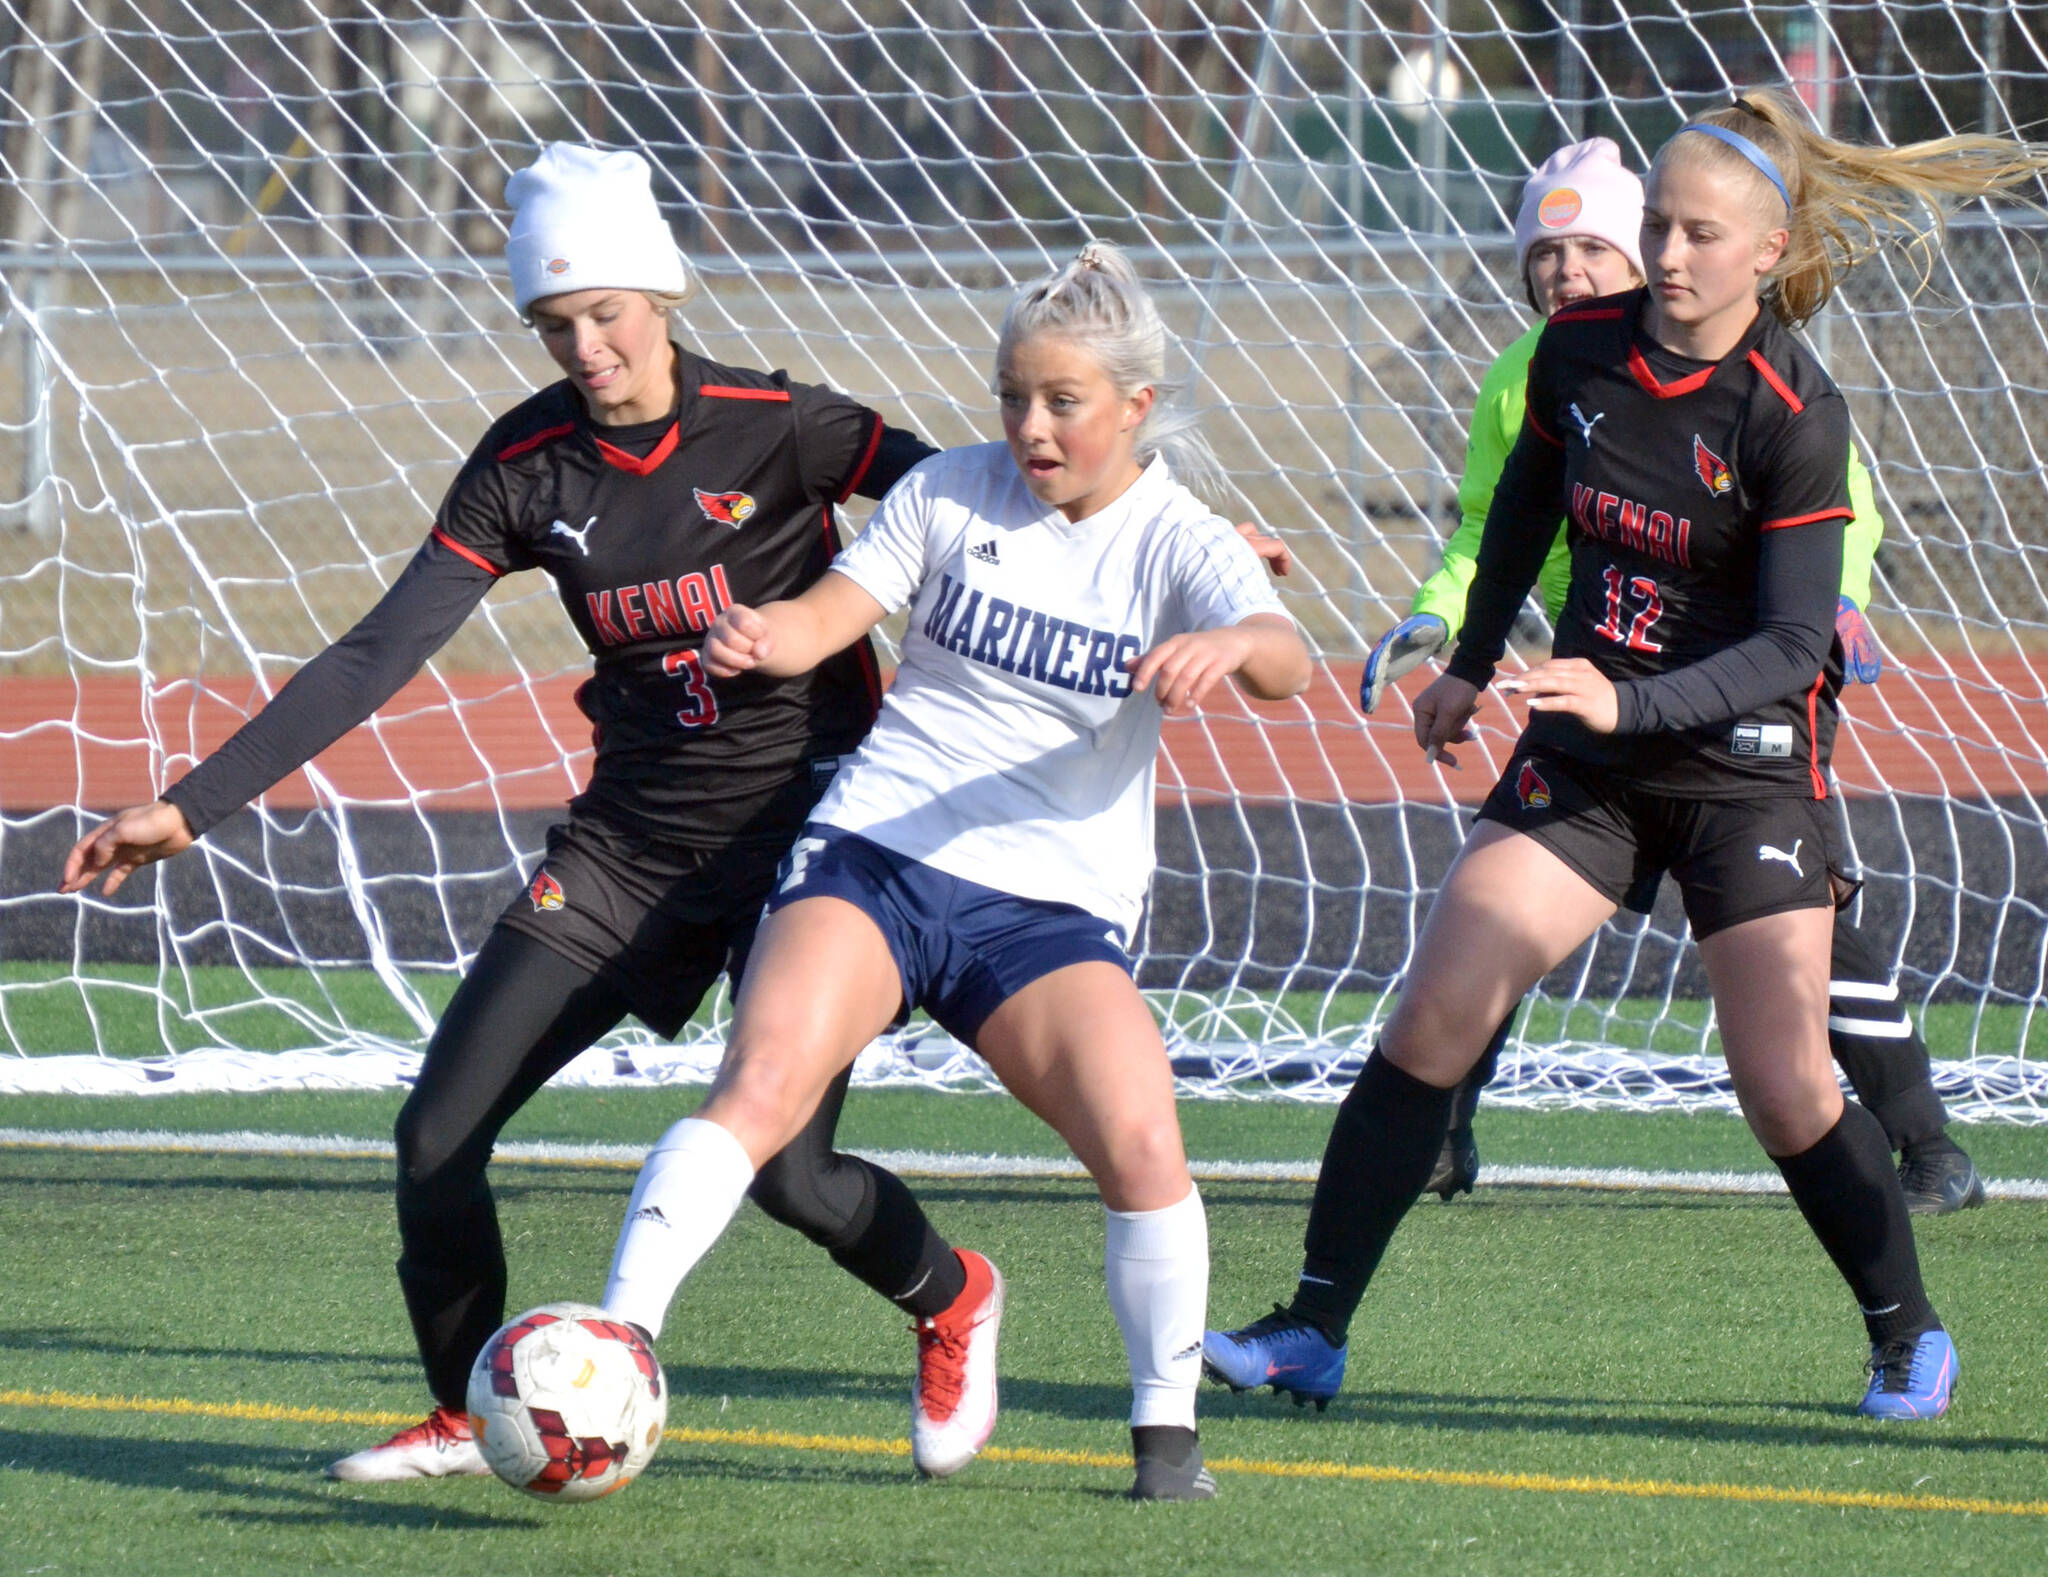 Homer’s Sela Weisser shields the ball from Kenai Central’s Cali Holmes and Kate Wisnewski before notching an assist Tuesday, May 10, 2022, at Ed Hollier Field at Kenai Central High School in Kenai, Alaska. (Photo by Jeff Helminiak/Peninsula Clarion)